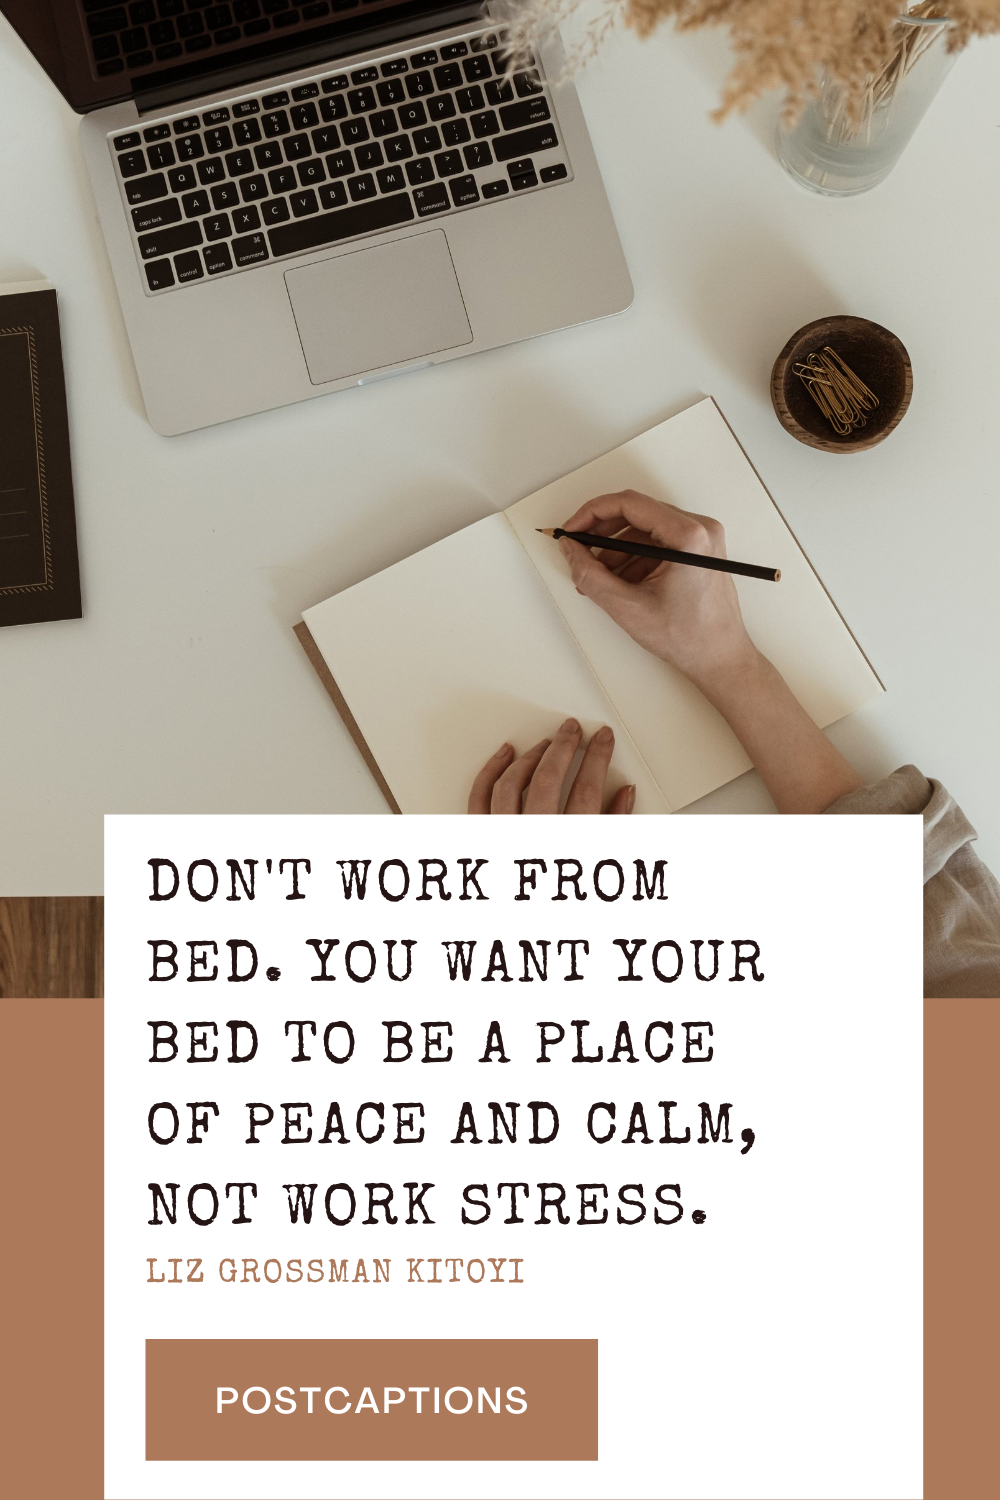 Work from home quotes for instagram